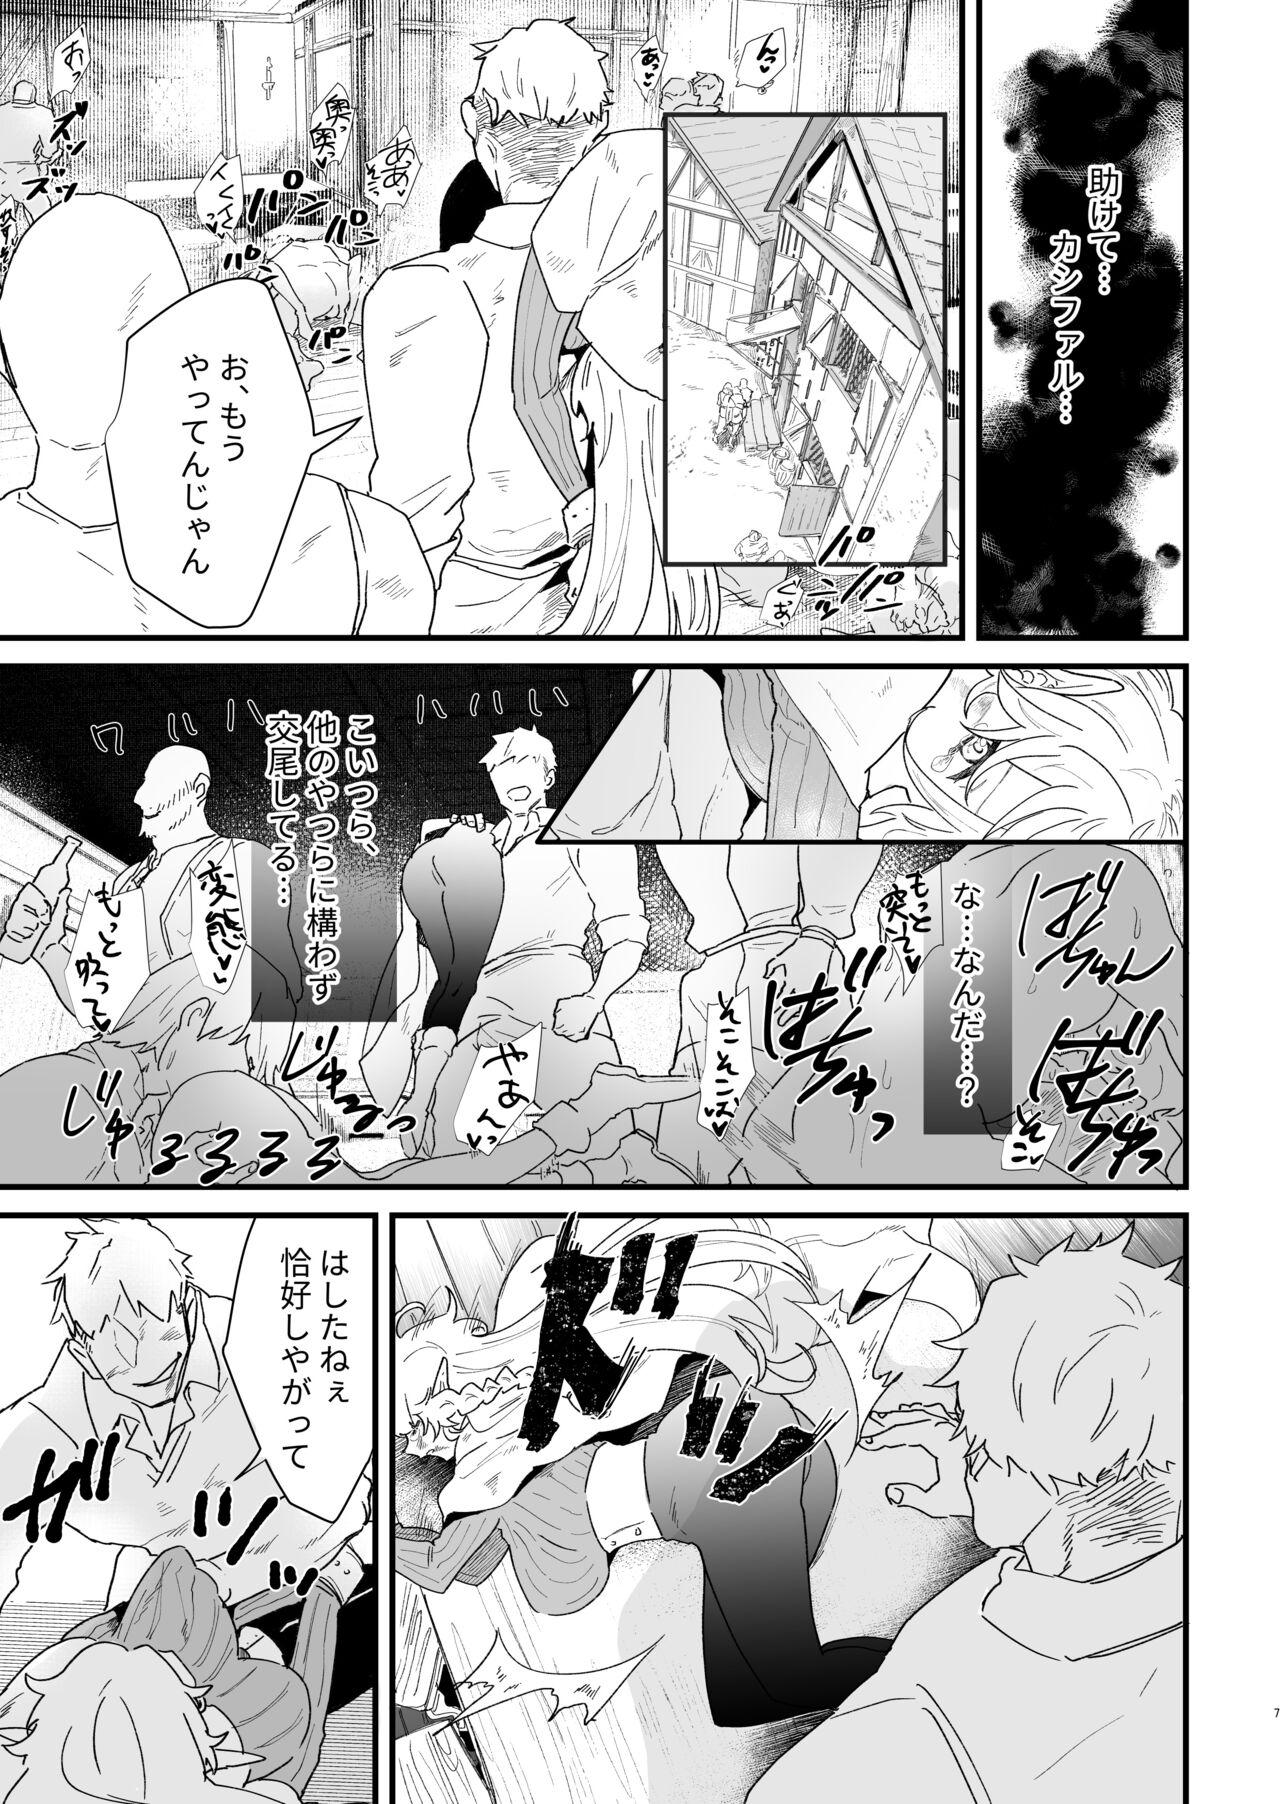 Moaning 爪弾き者のソムニア5 - Original Pawg - Page 6